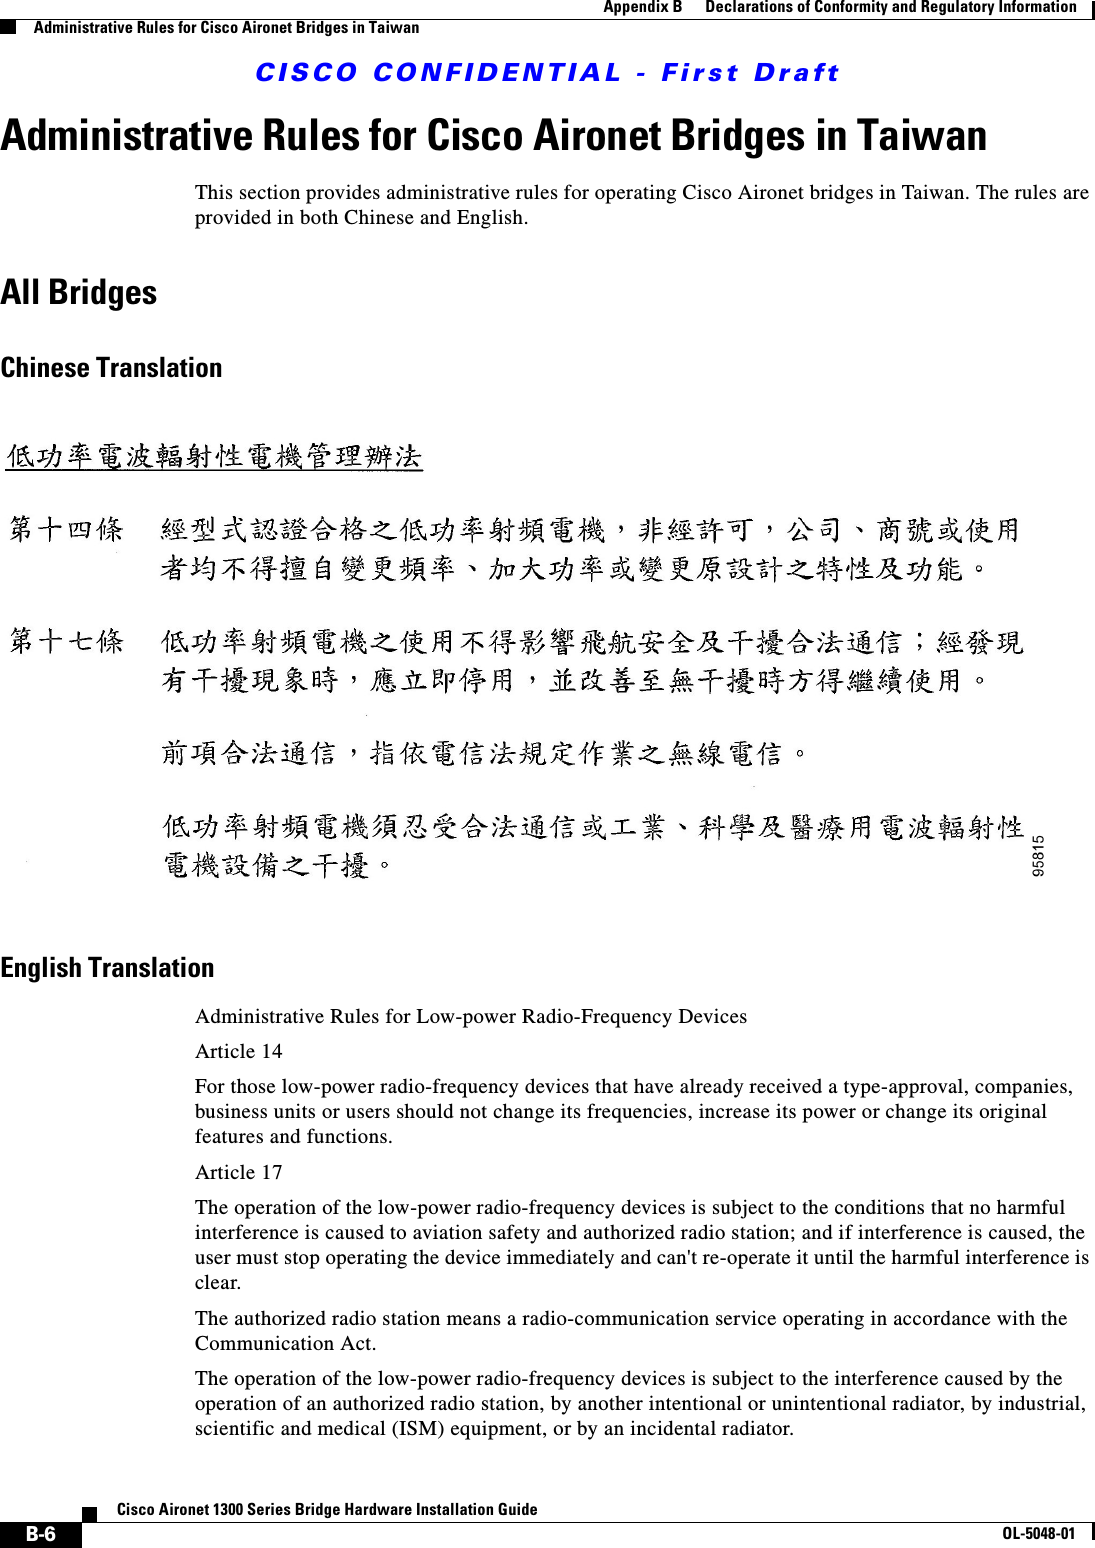 CISCO CONFIDENTIAL - First DraftB-6Cisco Aironet 1300 Series Bridge Hardware Installation GuideOL-5048-01Appendix B      Declarations of Conformity and Regulatory InformationAdministrative Rules for Cisco Aironet Bridges in TaiwanAdministrative Rules for Cisco Aironet Bridges in TaiwanThis section provides administrative rules for operating Cisco Aironet bridges in Taiwan. The rules are provided in both Chinese and English.All BridgesChinese TranslationEnglish TranslationAdministrative Rules for Low-power Radio-Frequency DevicesArticle 14For those low-power radio-frequency devices that have already received a type-approval, companies, business units or users should not change its frequencies, increase its power or change its original features and functions.Article 17The operation of the low-power radio-frequency devices is subject to the conditions that no harmful interference is caused to aviation safety and authorized radio station; and if interference is caused, the user must stop operating the device immediately and can&apos;t re-operate it until the harmful interference is clear.The authorized radio station means a radio-communication service operating in accordance with the Communication Act. The operation of the low-power radio-frequency devices is subject to the interference caused by the operation of an authorized radio station, by another intentional or unintentional radiator, by industrial, scientific and medical (ISM) equipment, or by an incidental radiator. 